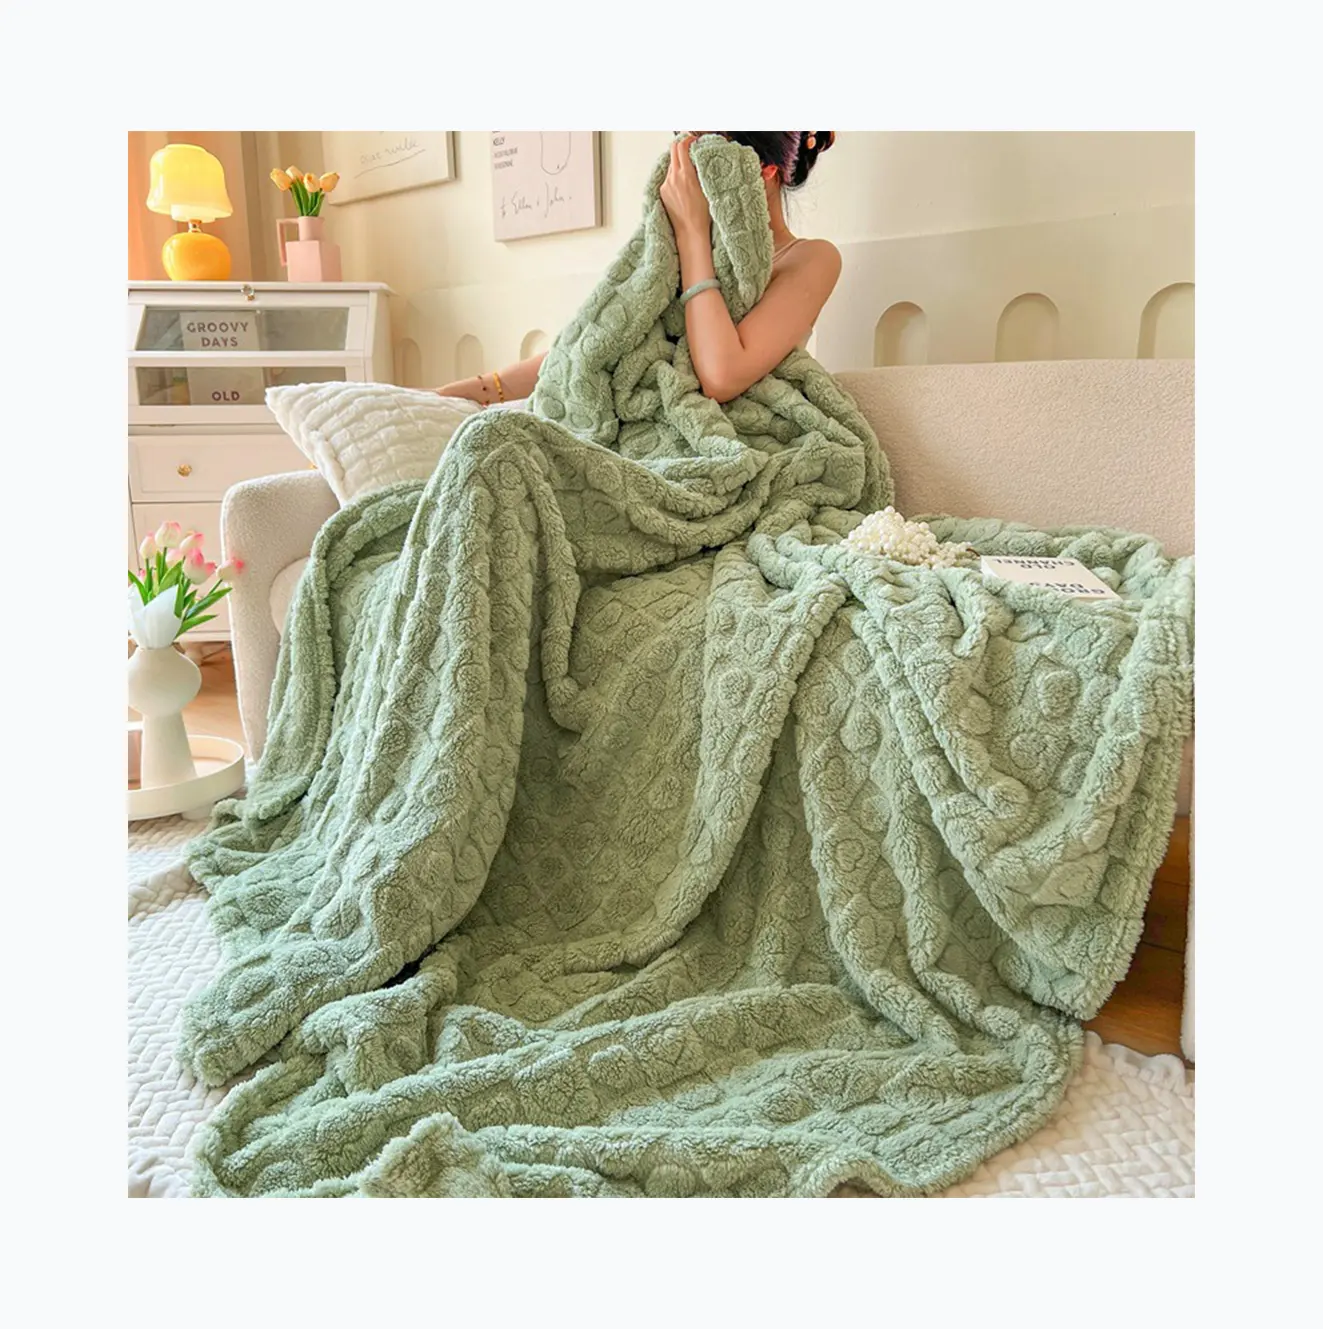 Assorted Bright Colors Blanket Competitive Price soft warm luxury home textiles for all season